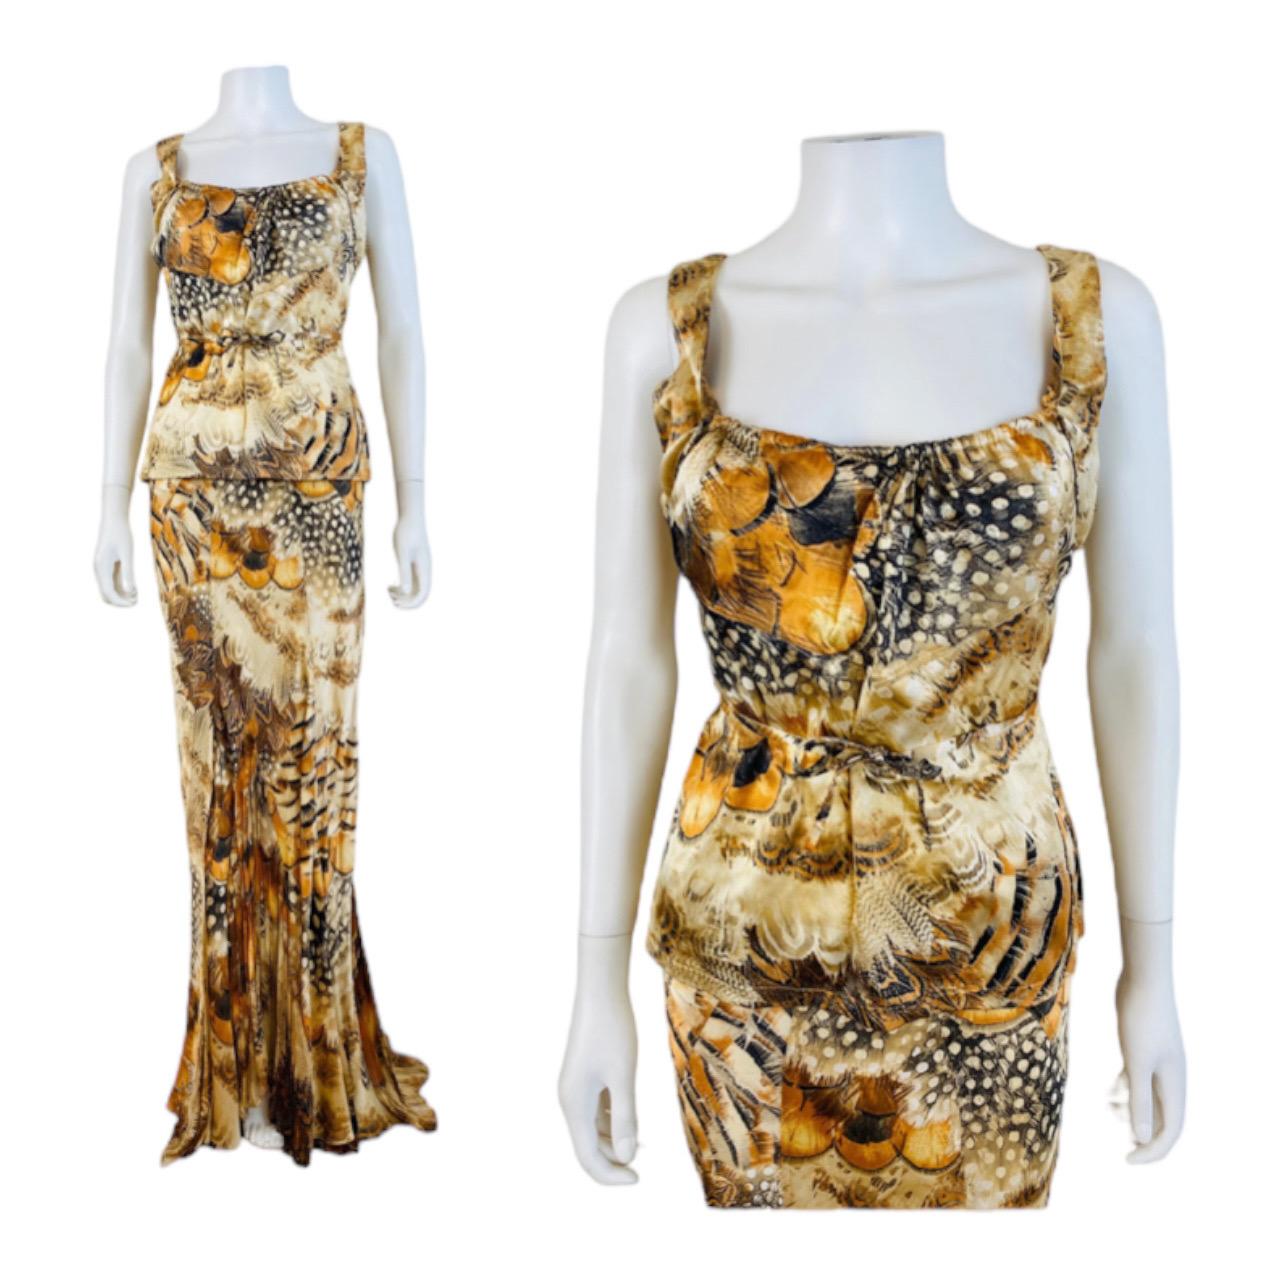 Vintage S/S 2004 Roberto Cavalli Feather Print Silk Top + Skirt Set In Excellent Condition For Sale In Denver, CO